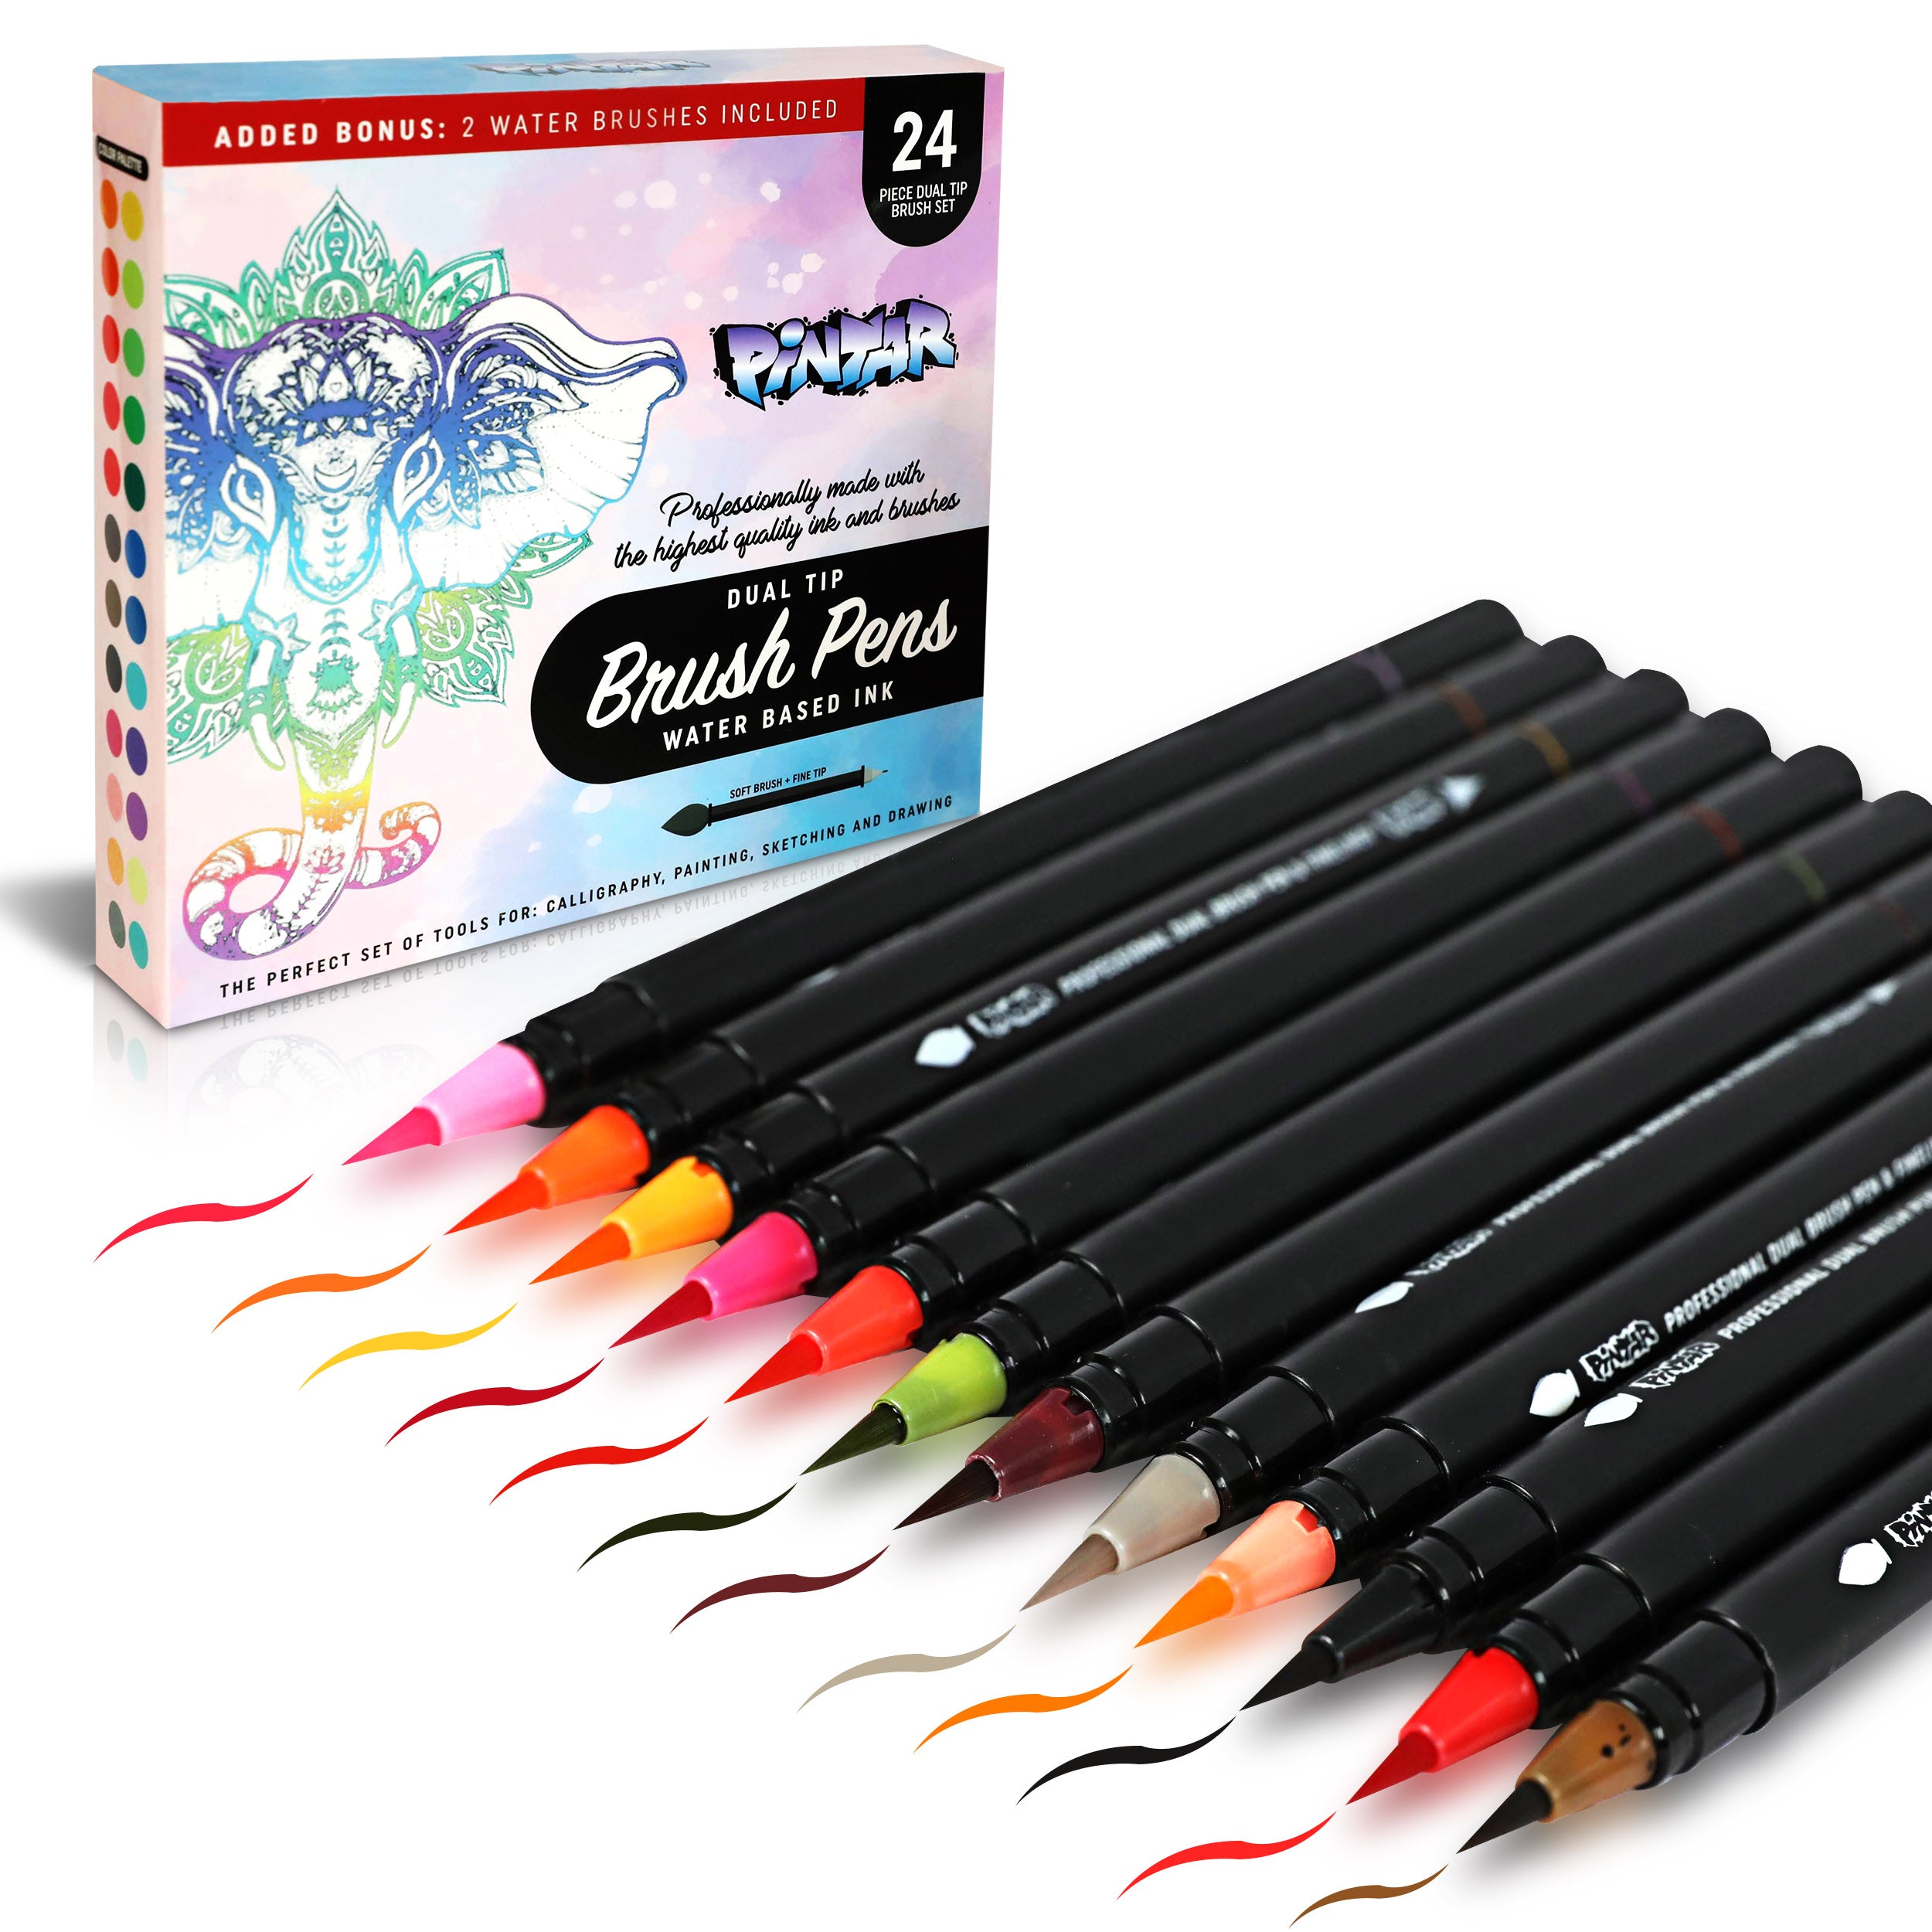 Dual Tips 100 Colors Fine Brush Marker Based Ink Watercolor